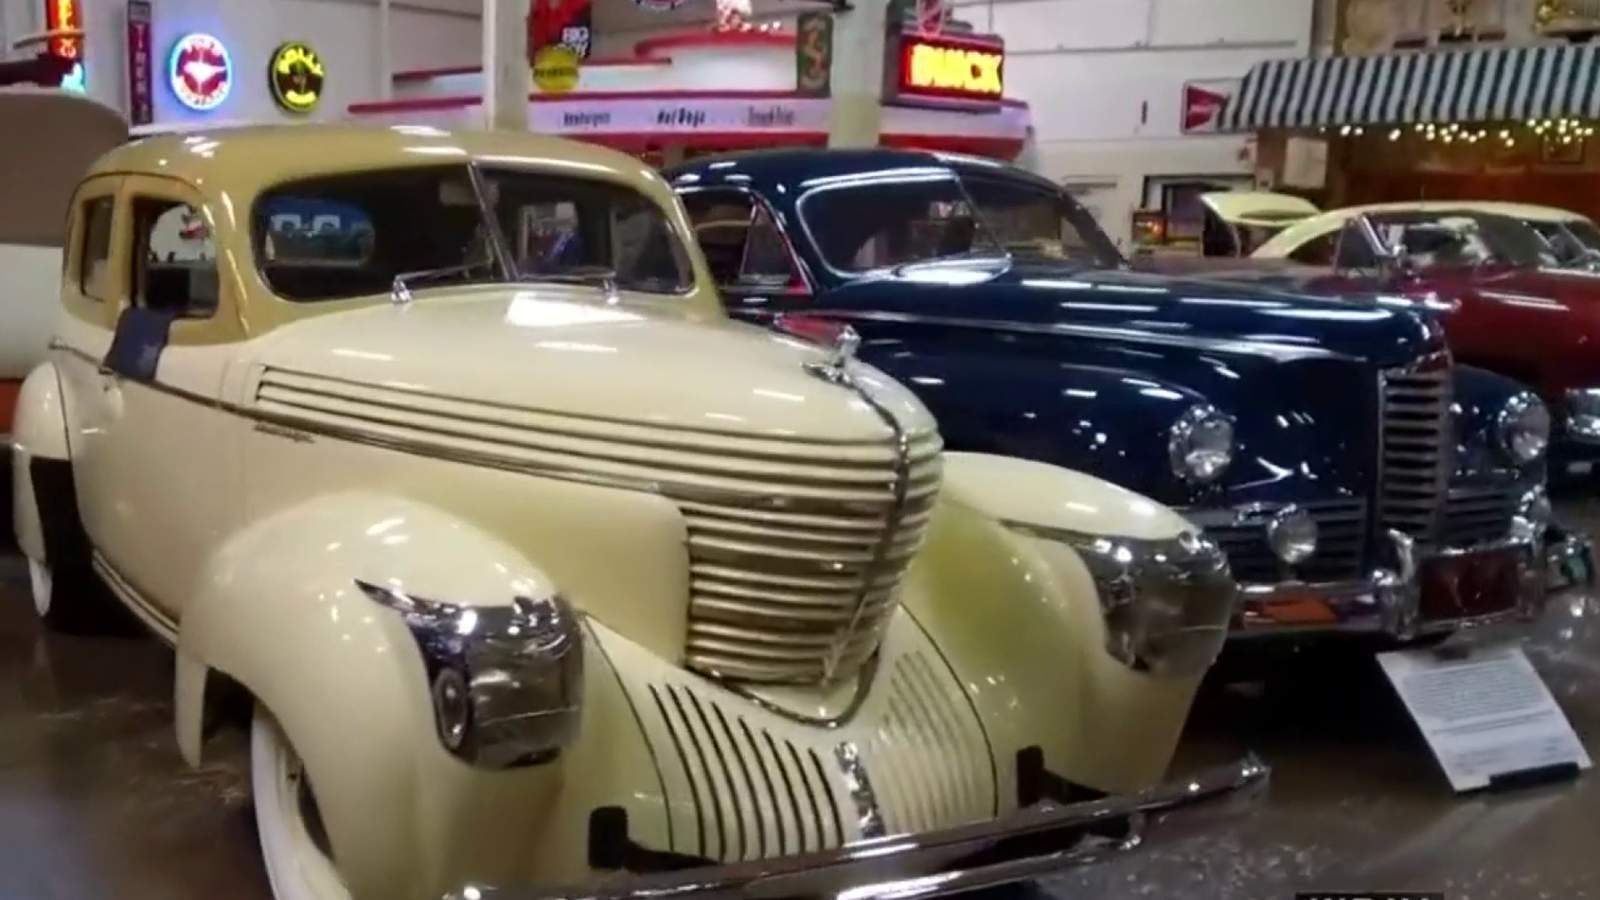 The Metro Detroit museum is all about Motor City classics